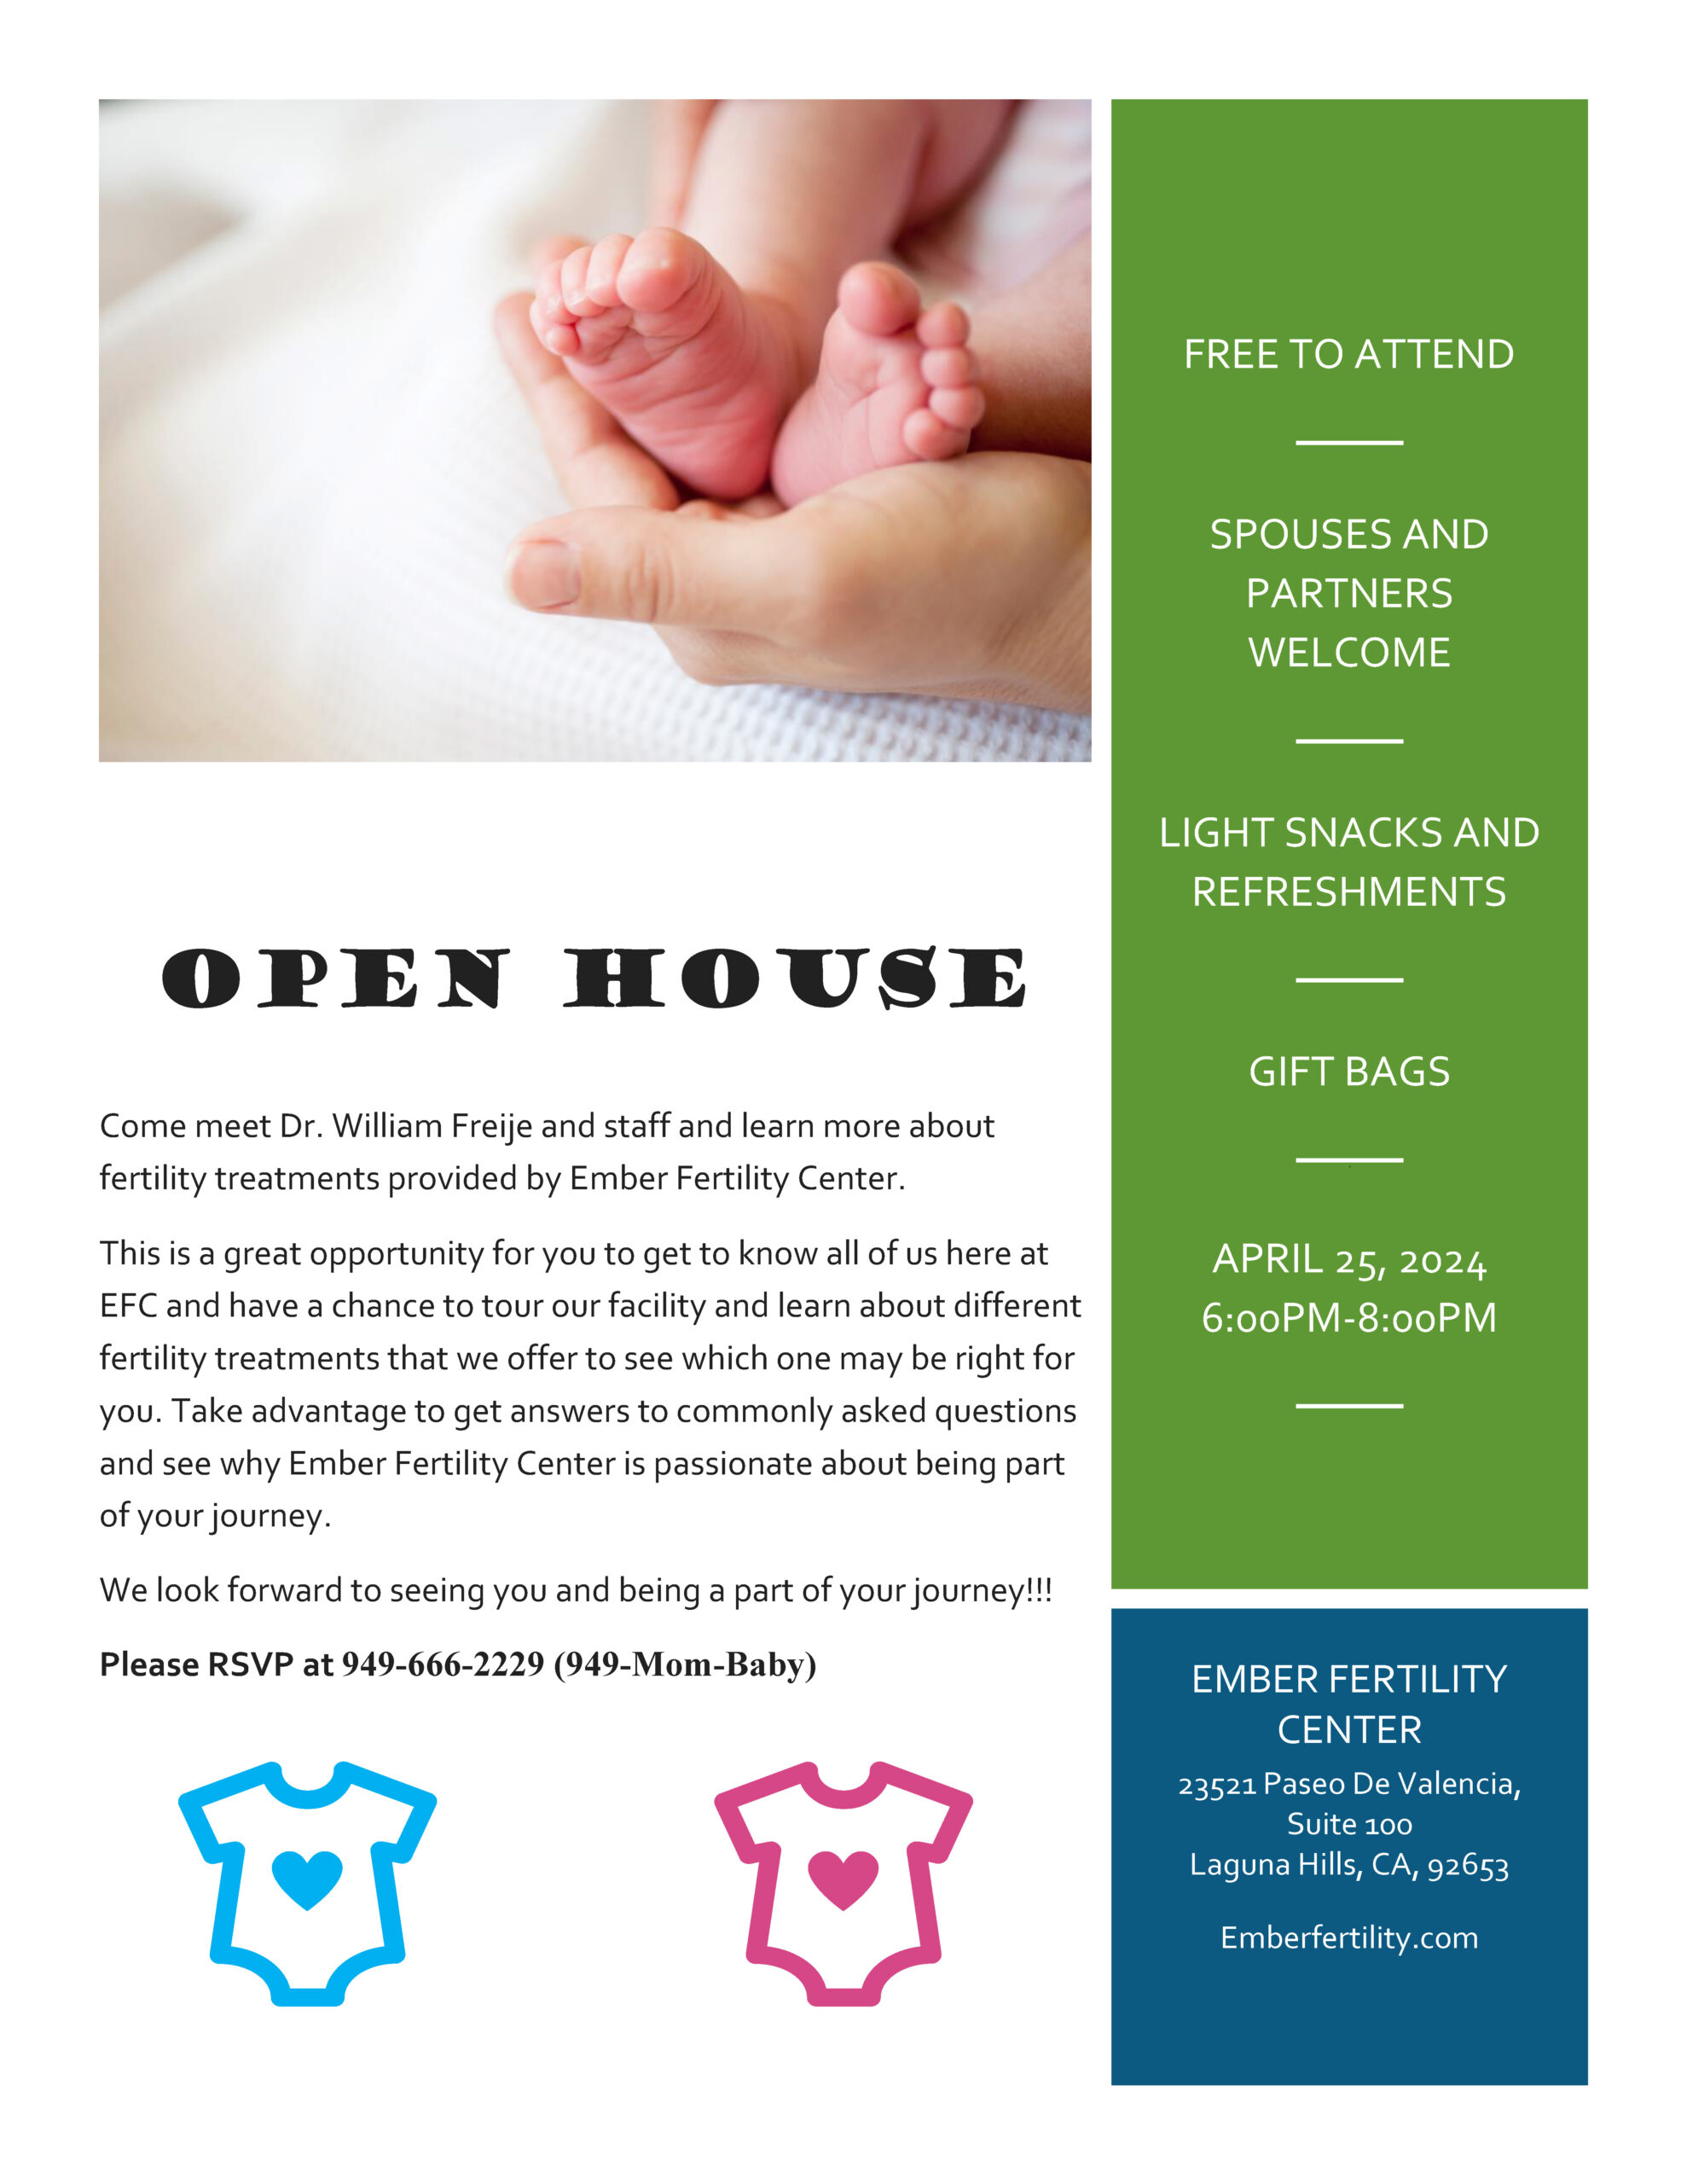 Open house event graphic | Ember Fertility